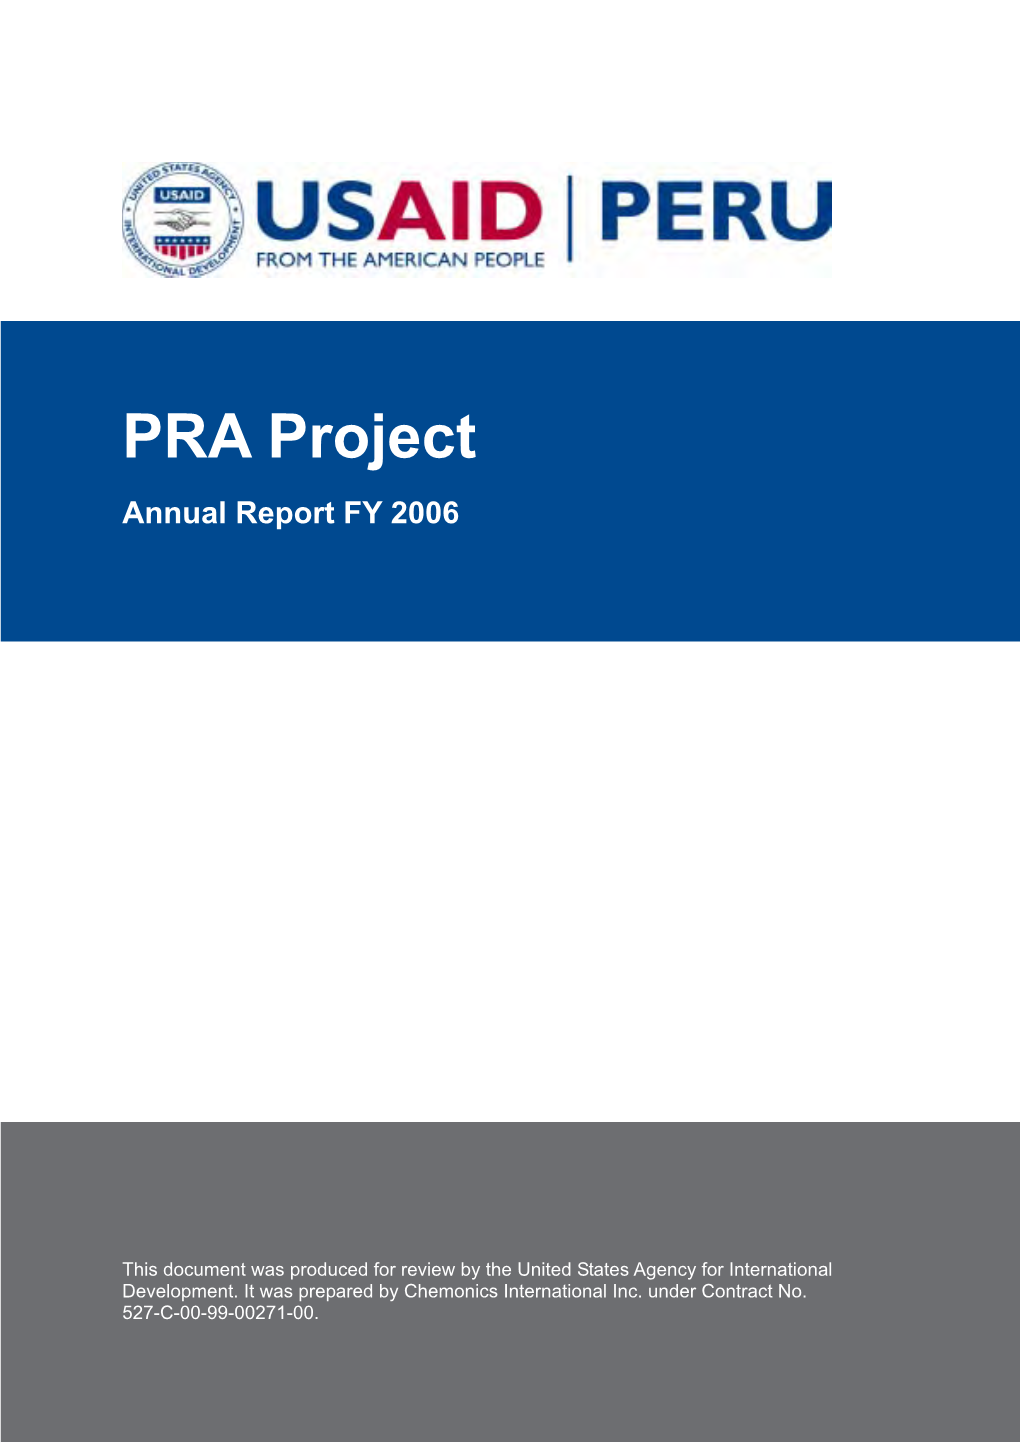 PRA Project Annual Report FY 2006